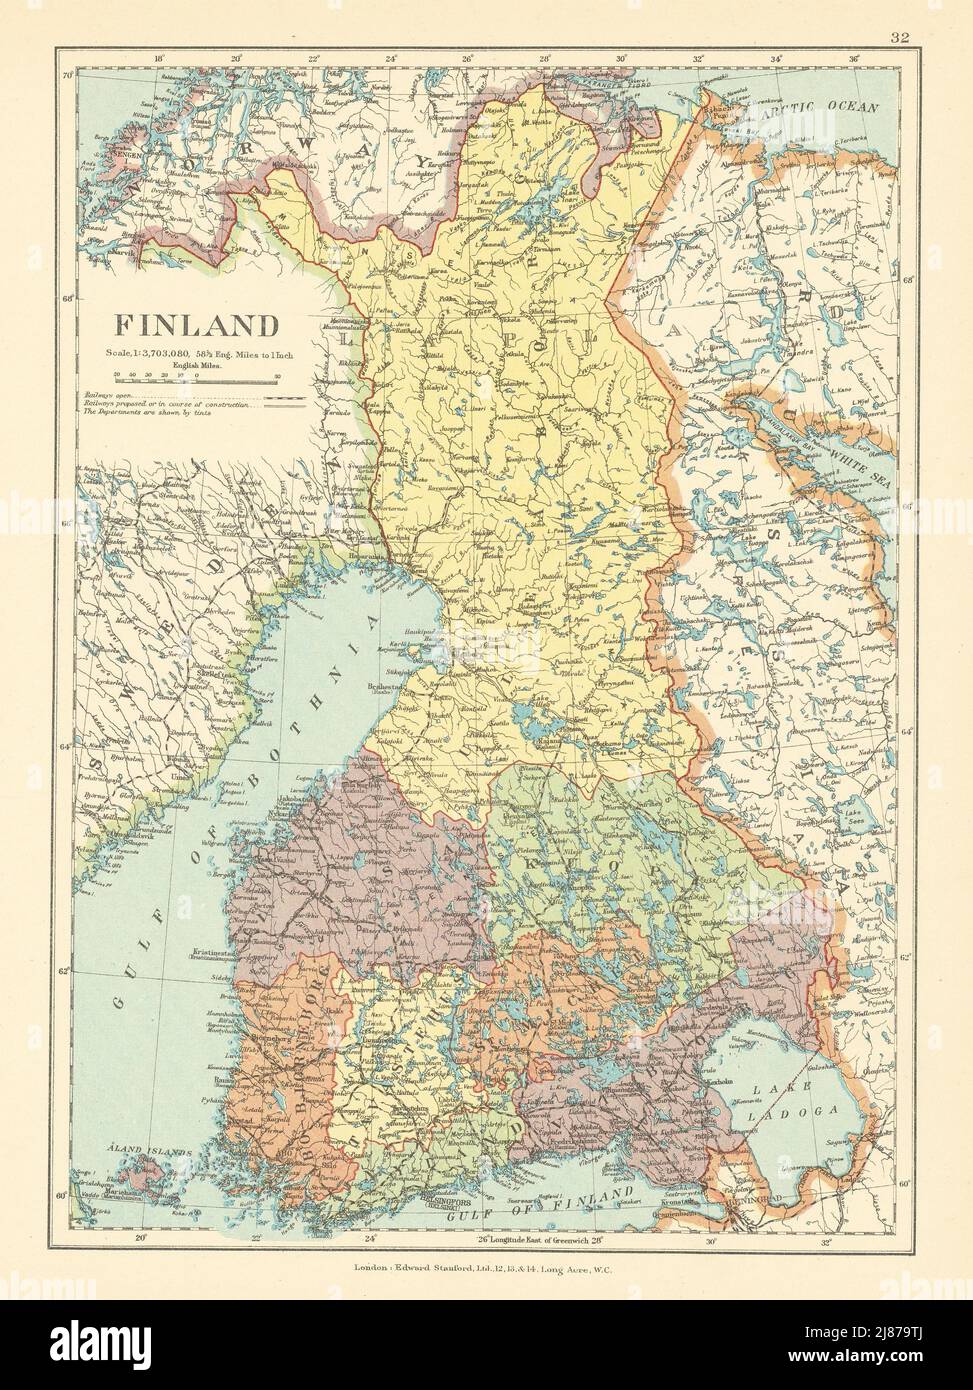 Finland. Pre WW2 borders with Russia. Gulf of Bothnia. STANFORD c1925 old map Stock Photo